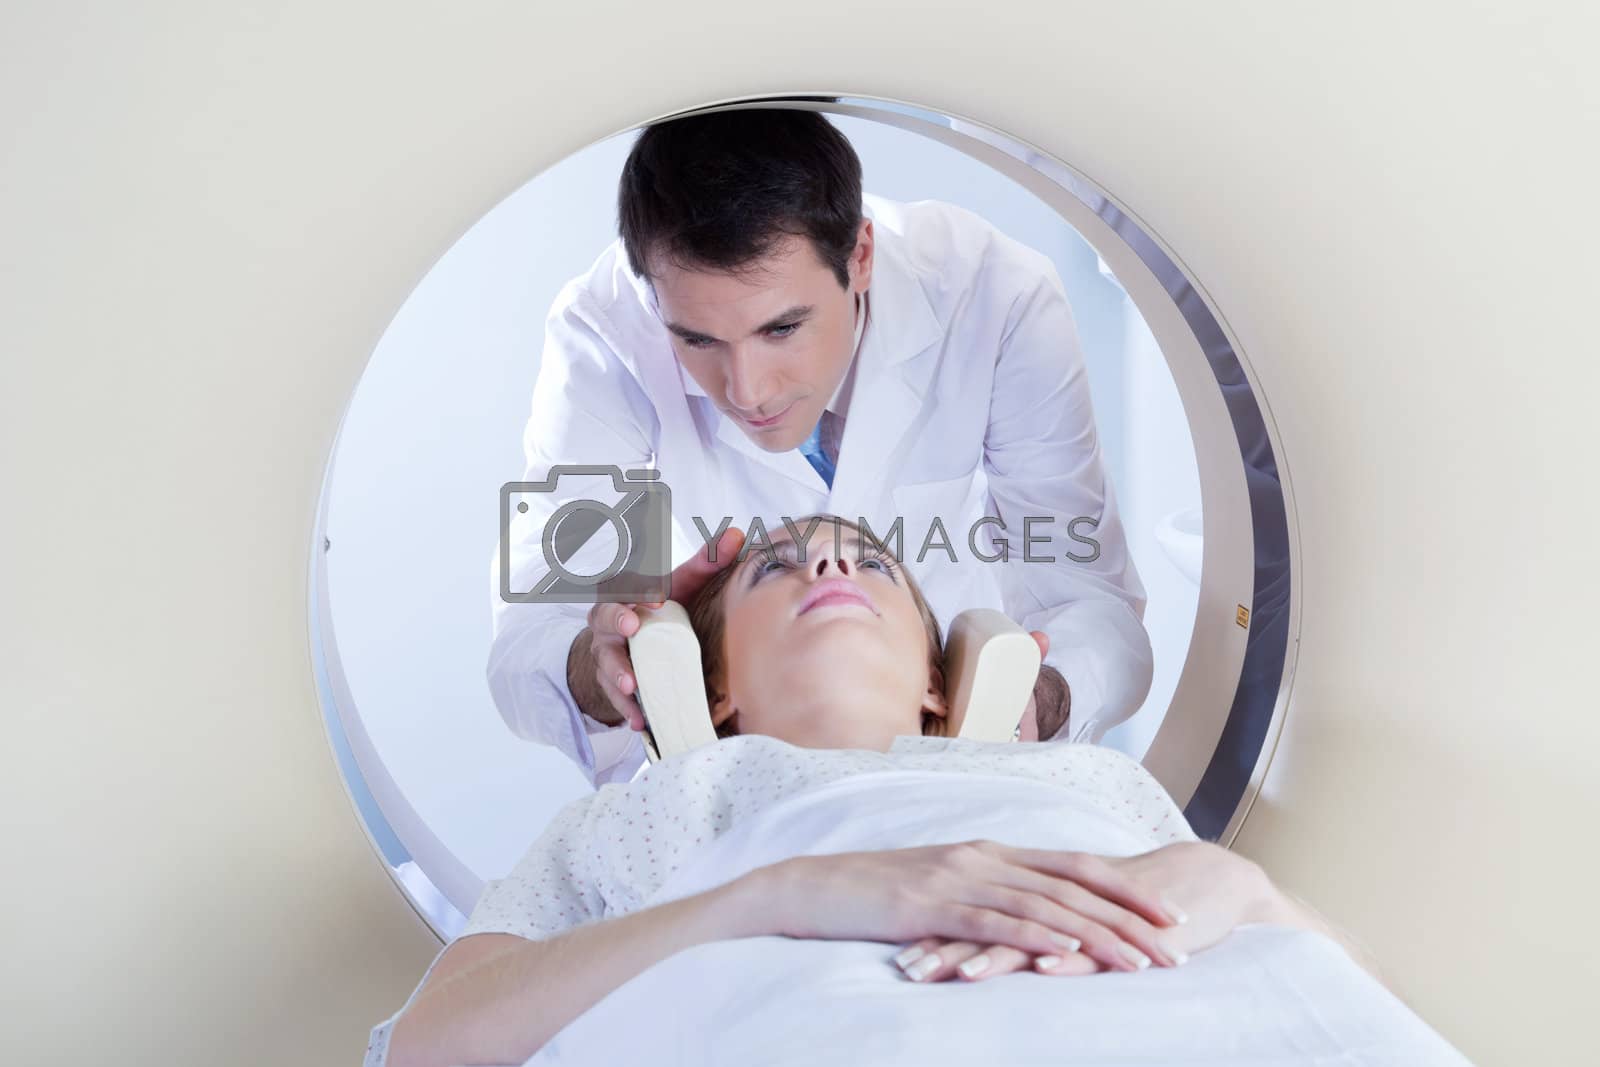 Royalty free image of Patient going through MRI test by leaf